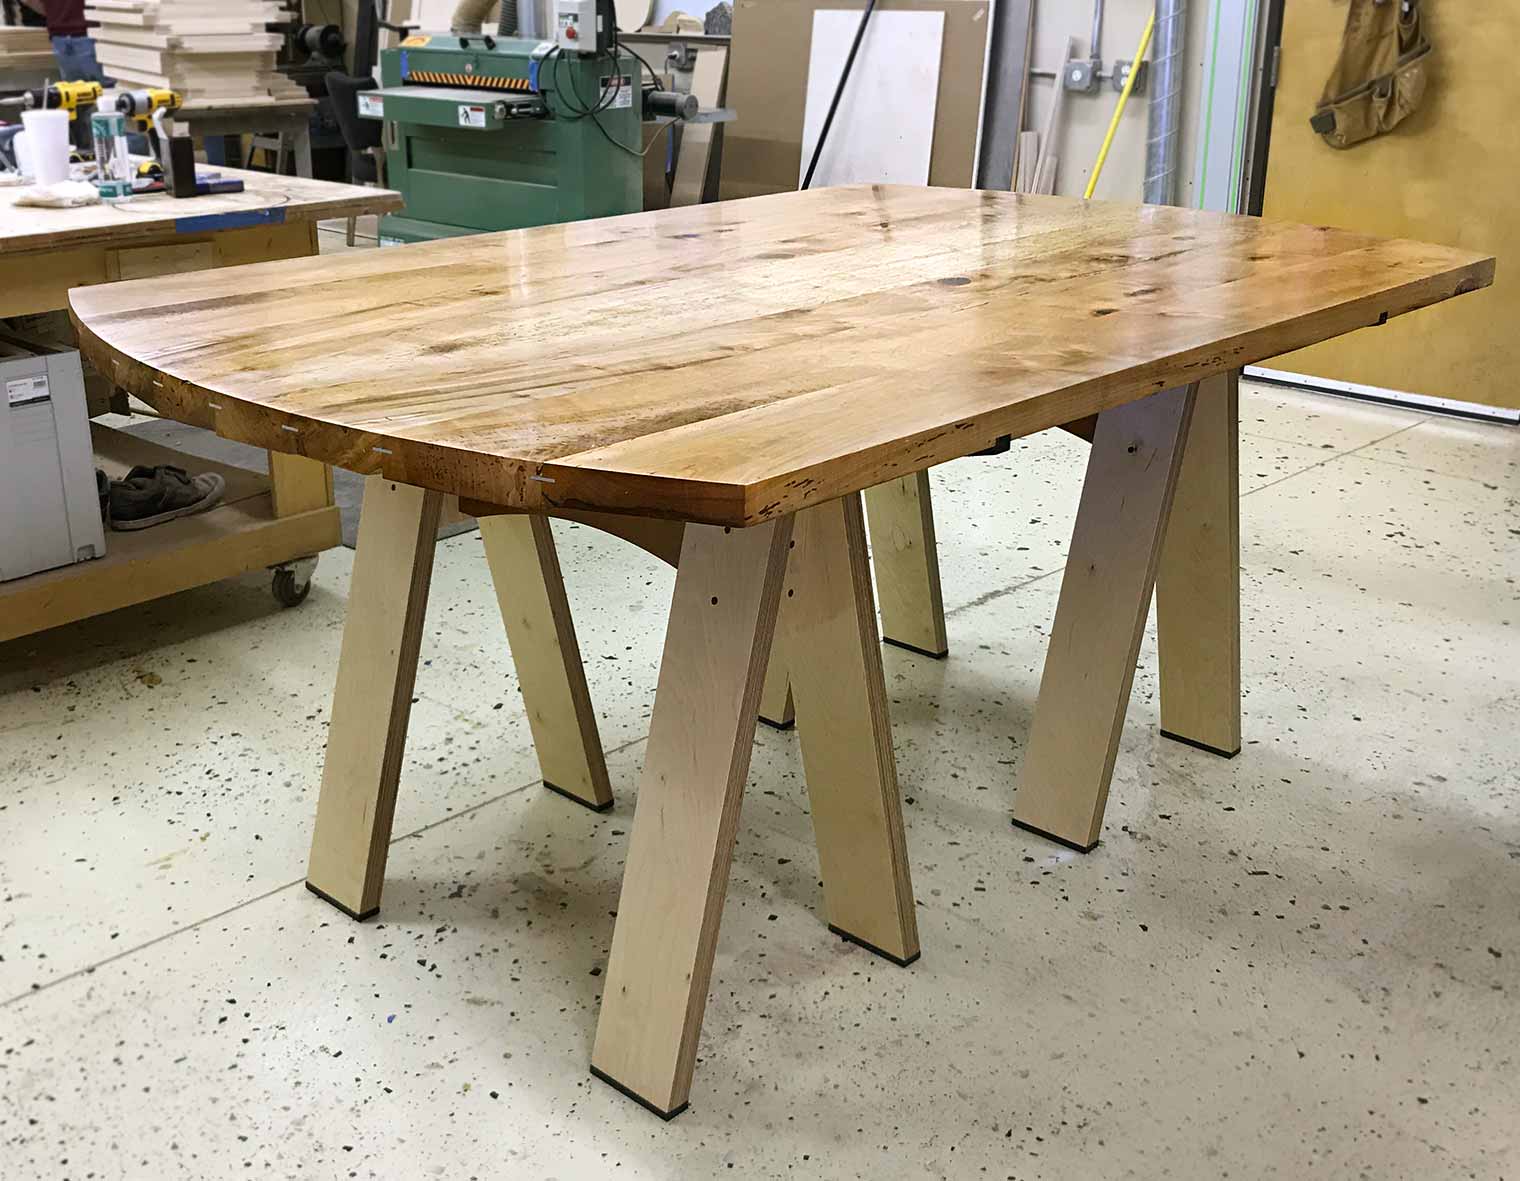 gathering table of rustic maple beams designed by Silent Rivers woodshop will host conversation at Des Moines Arts Festival VIP Club